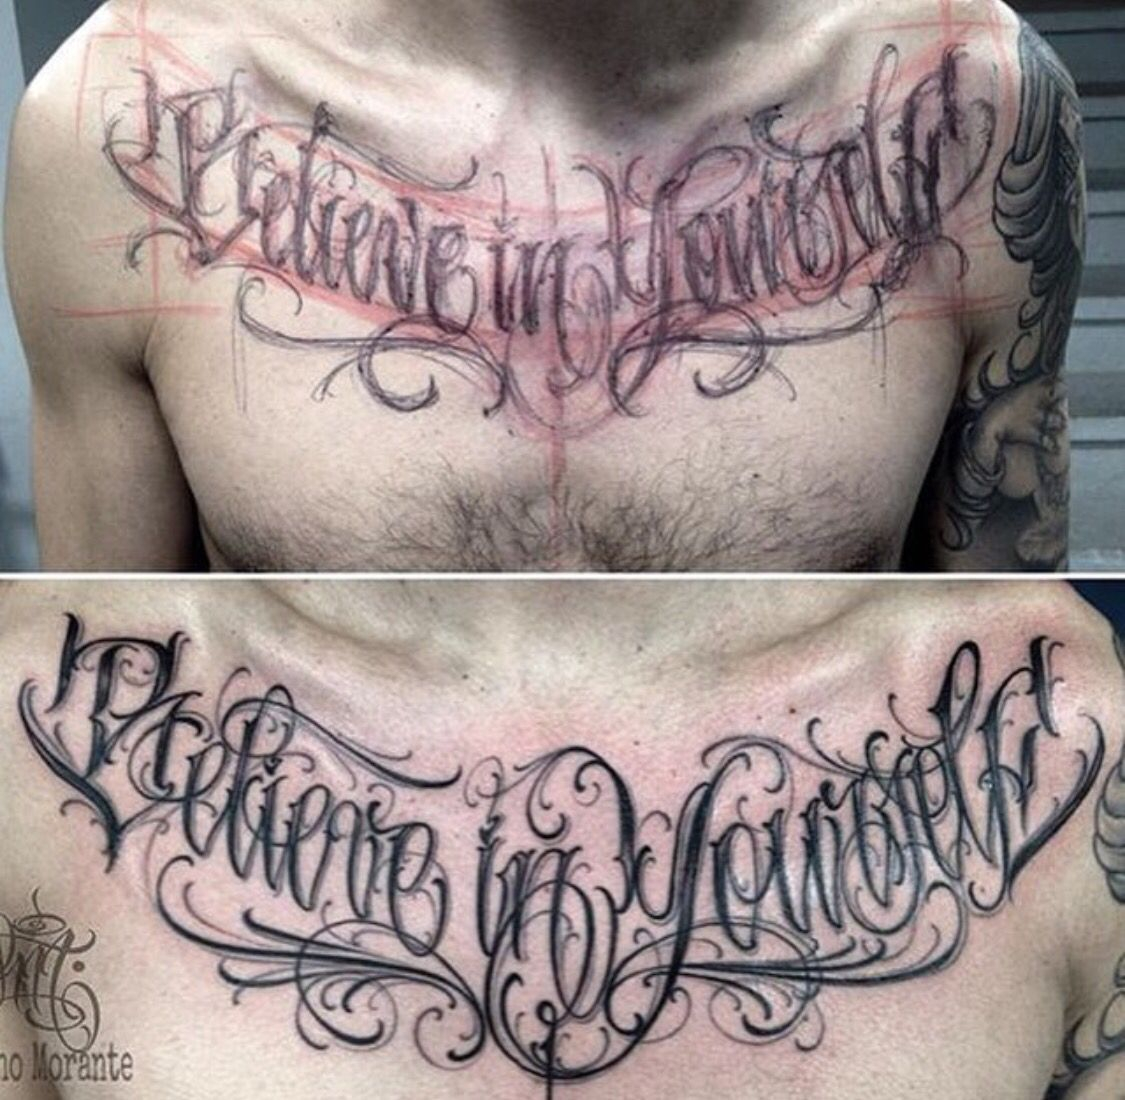 Believe In Yourself Chest Lettering Tattoo Tattoo Envy Tatuagem pertaining to size 1125 X 1100